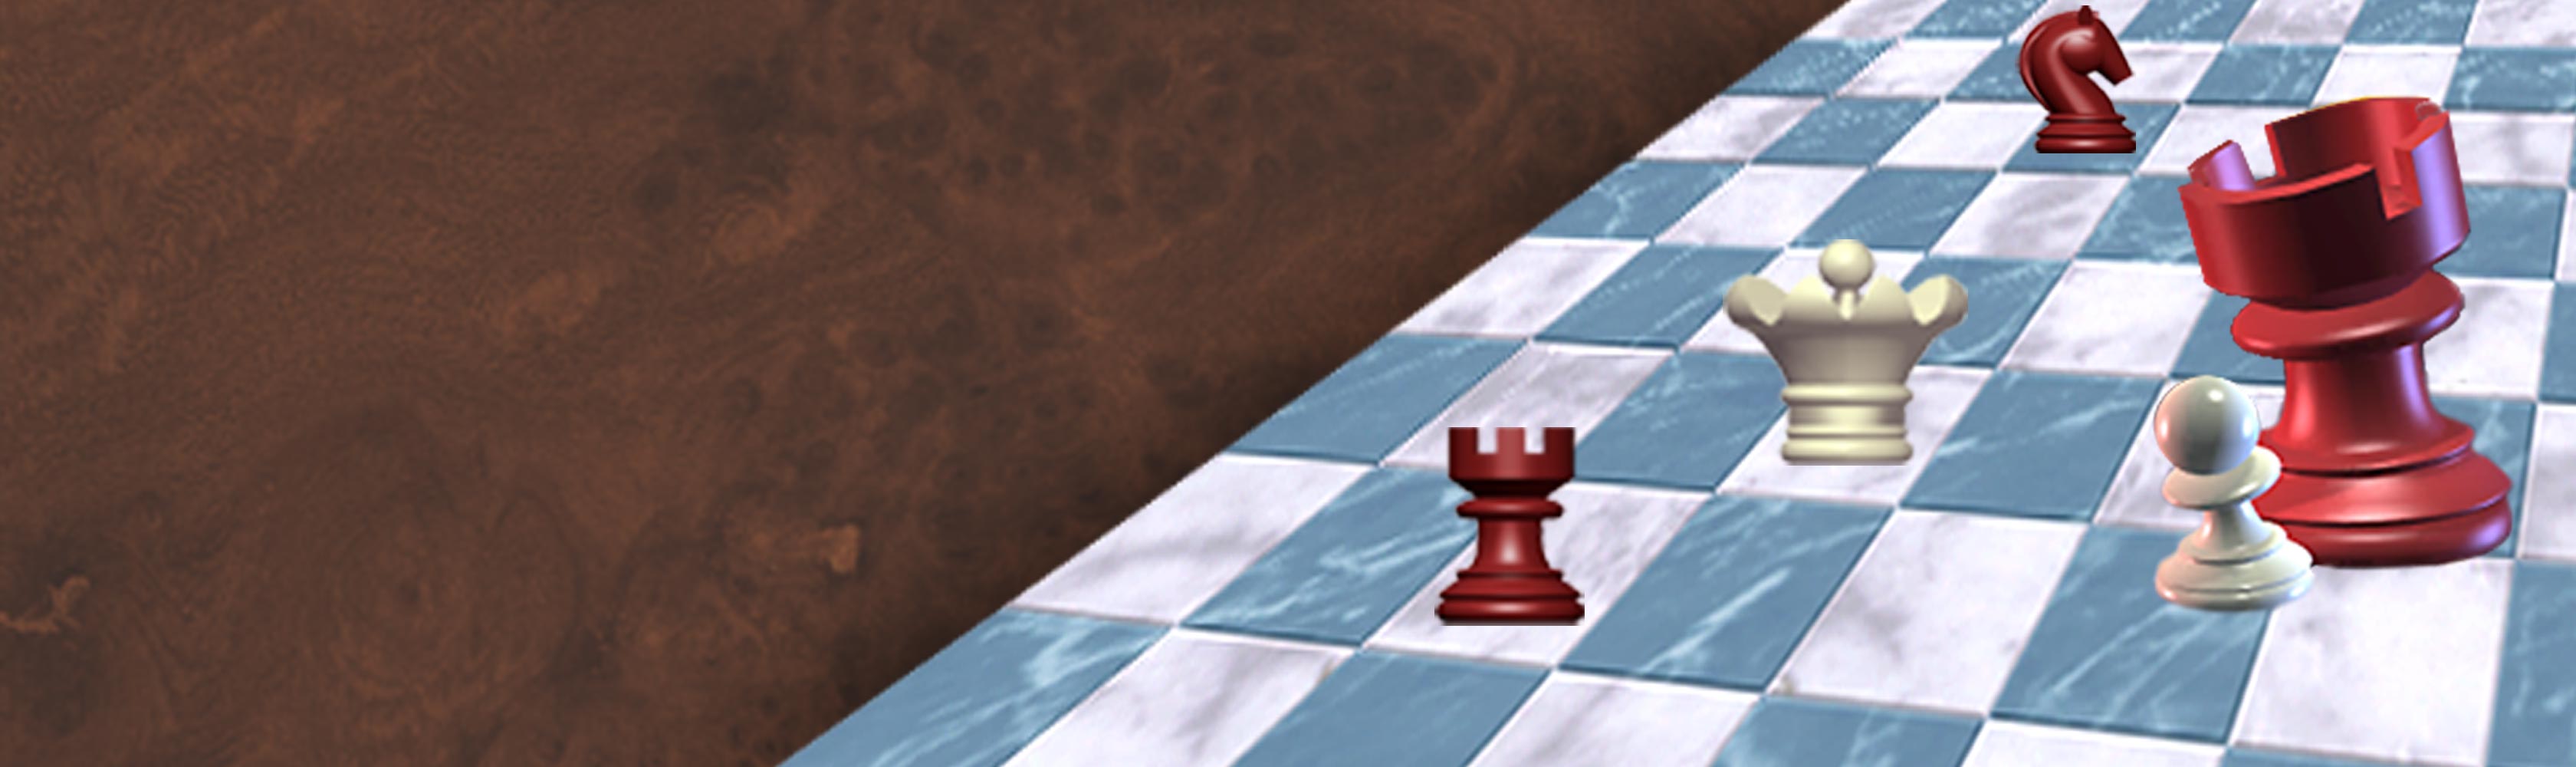 instal Chess Online Multiplayer free